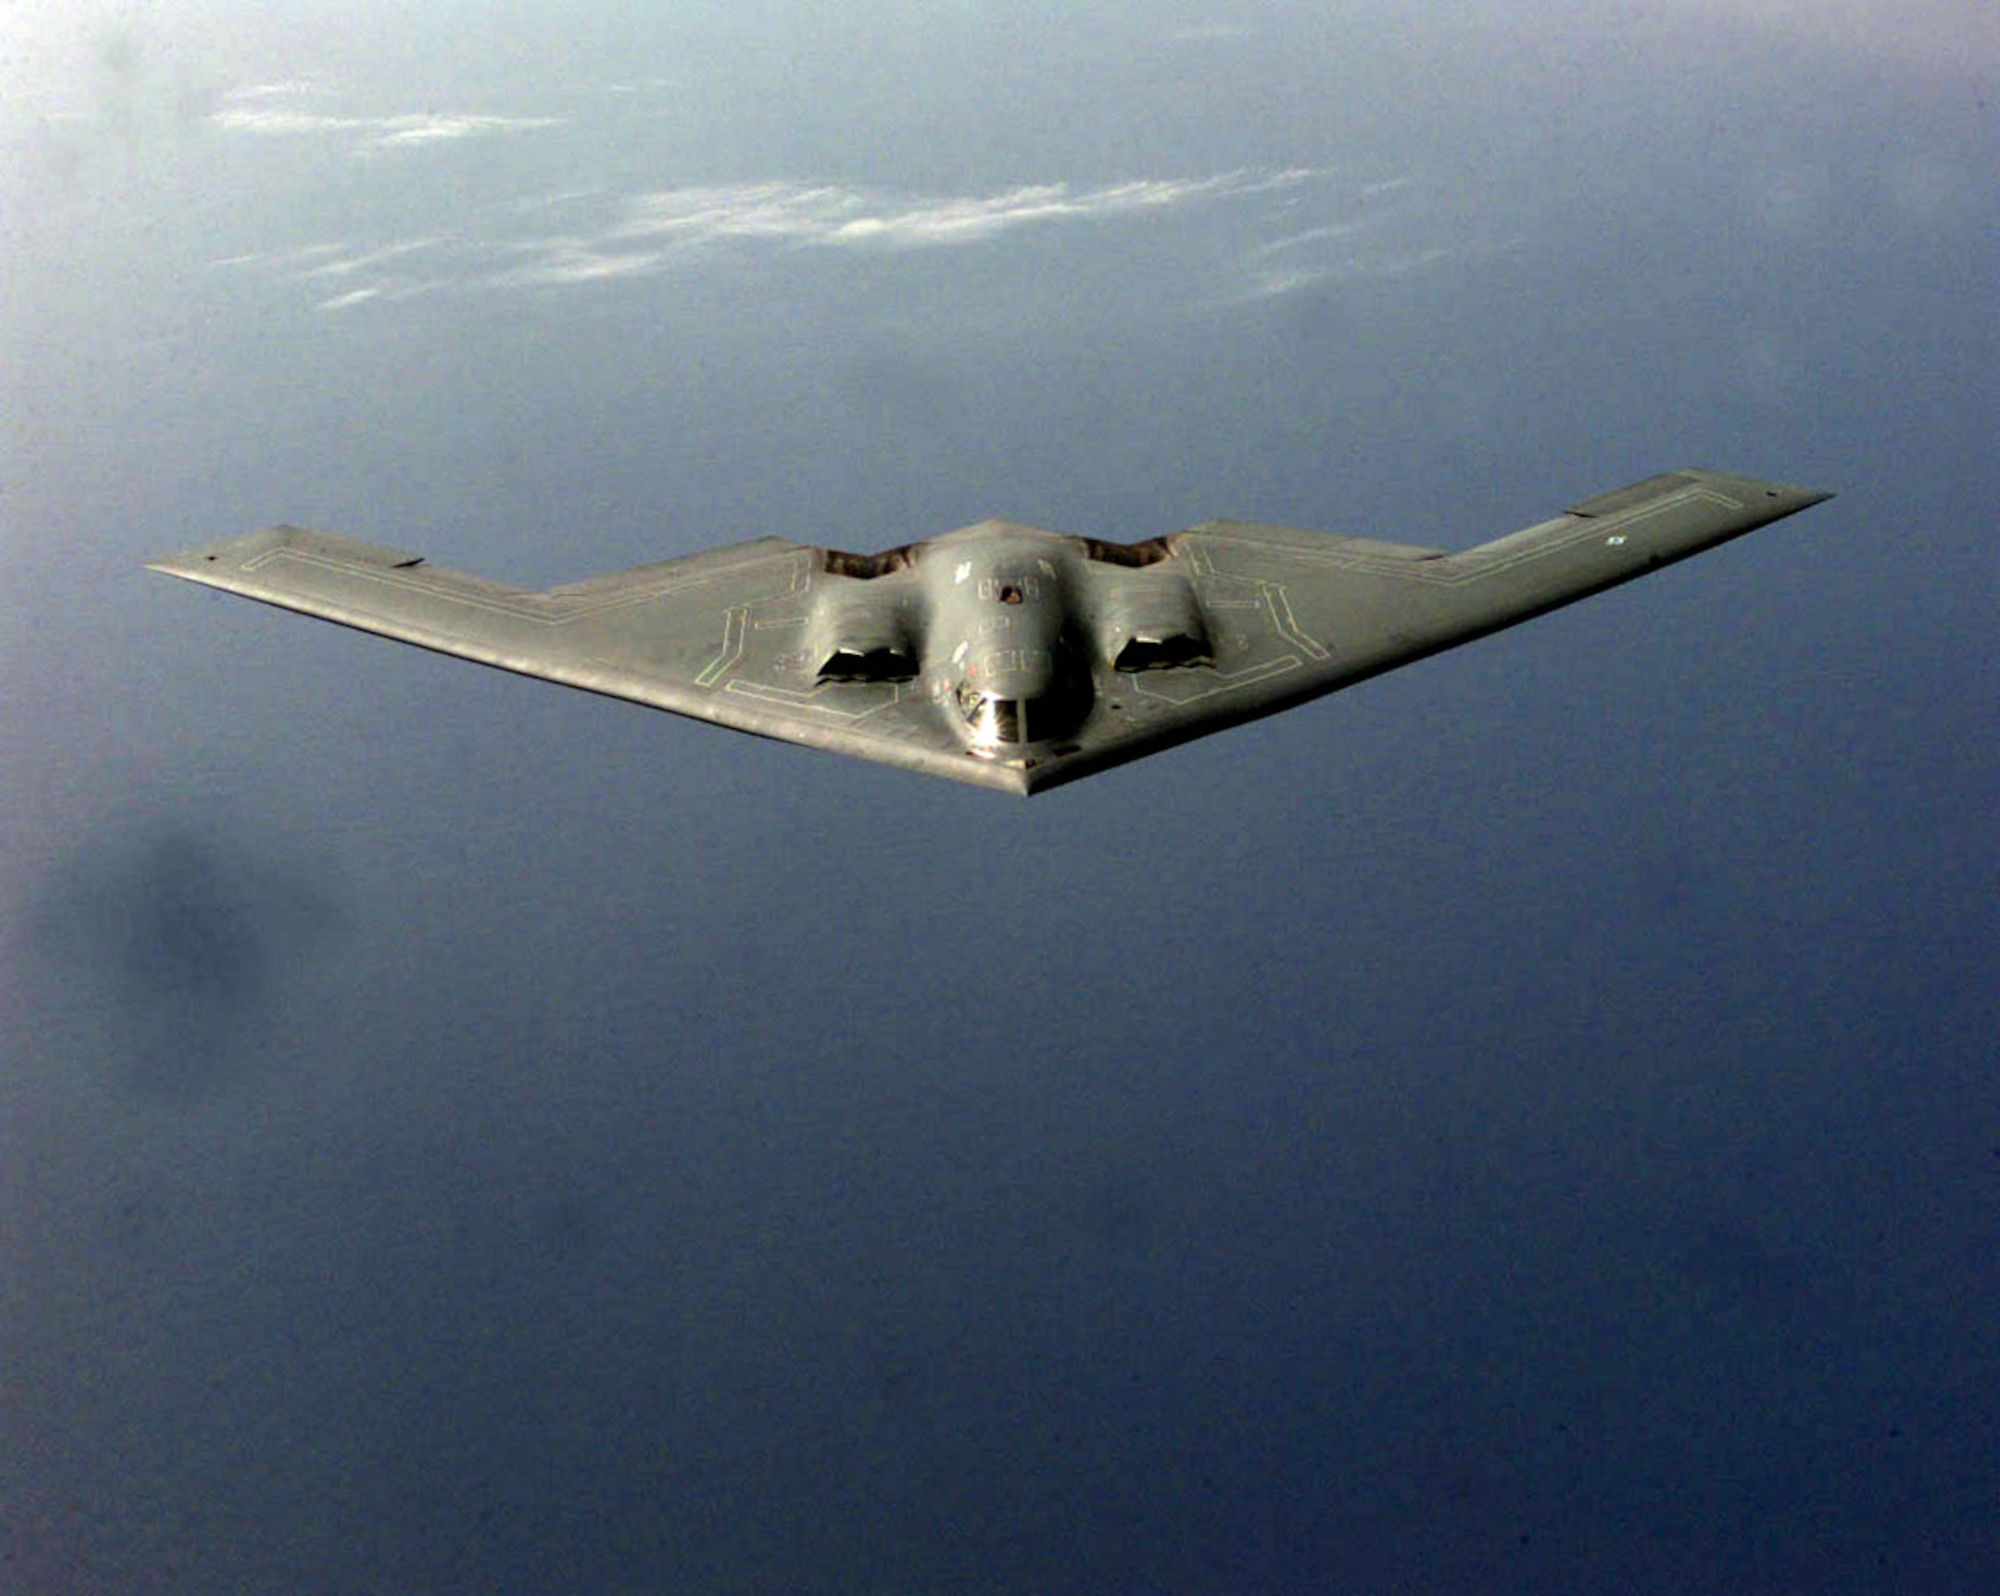 OPERATION ALLIED FORCE -- A B-2 Spirit bomber prepares to receive fuel from a KC-135 Stratotanker during a mission in the European theater supporting NATO Operation Allied Force. The B-2 Spirit is a multi-role bomber capable of delivering both conventional and nuclear munitions. A dramatic leap forward in technology, the bomber represents a major milestone in the U.S. bomber modernization program. The B-2 brings massive firepower to bear, in a short time, anywhere on the globe through previously impenetrable defenses. (U.S. Air Force photo by Staff Sgt. Ken Bergmann) 